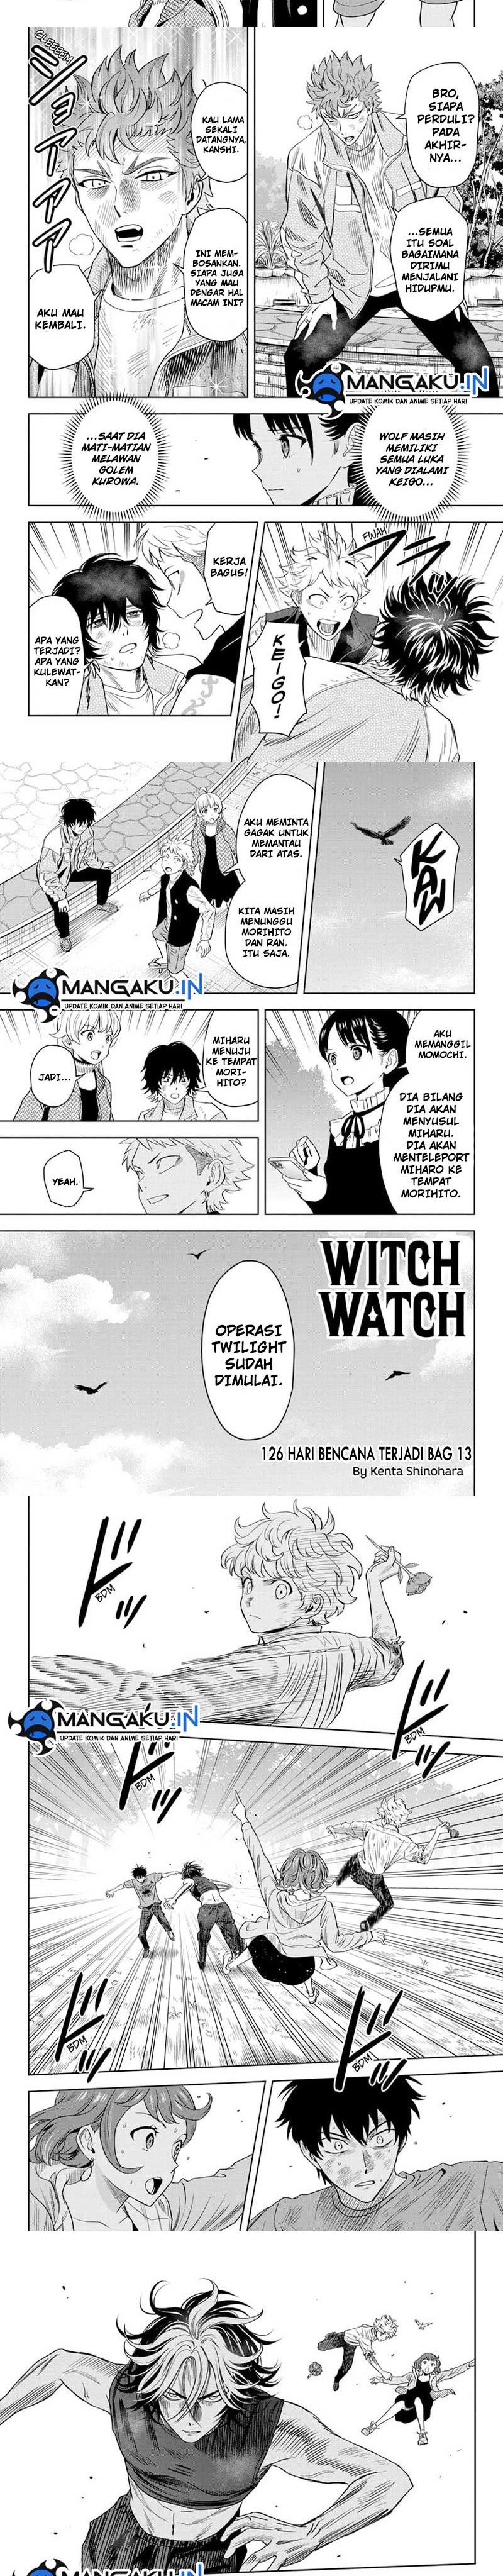 Witch Watch Chapter 126